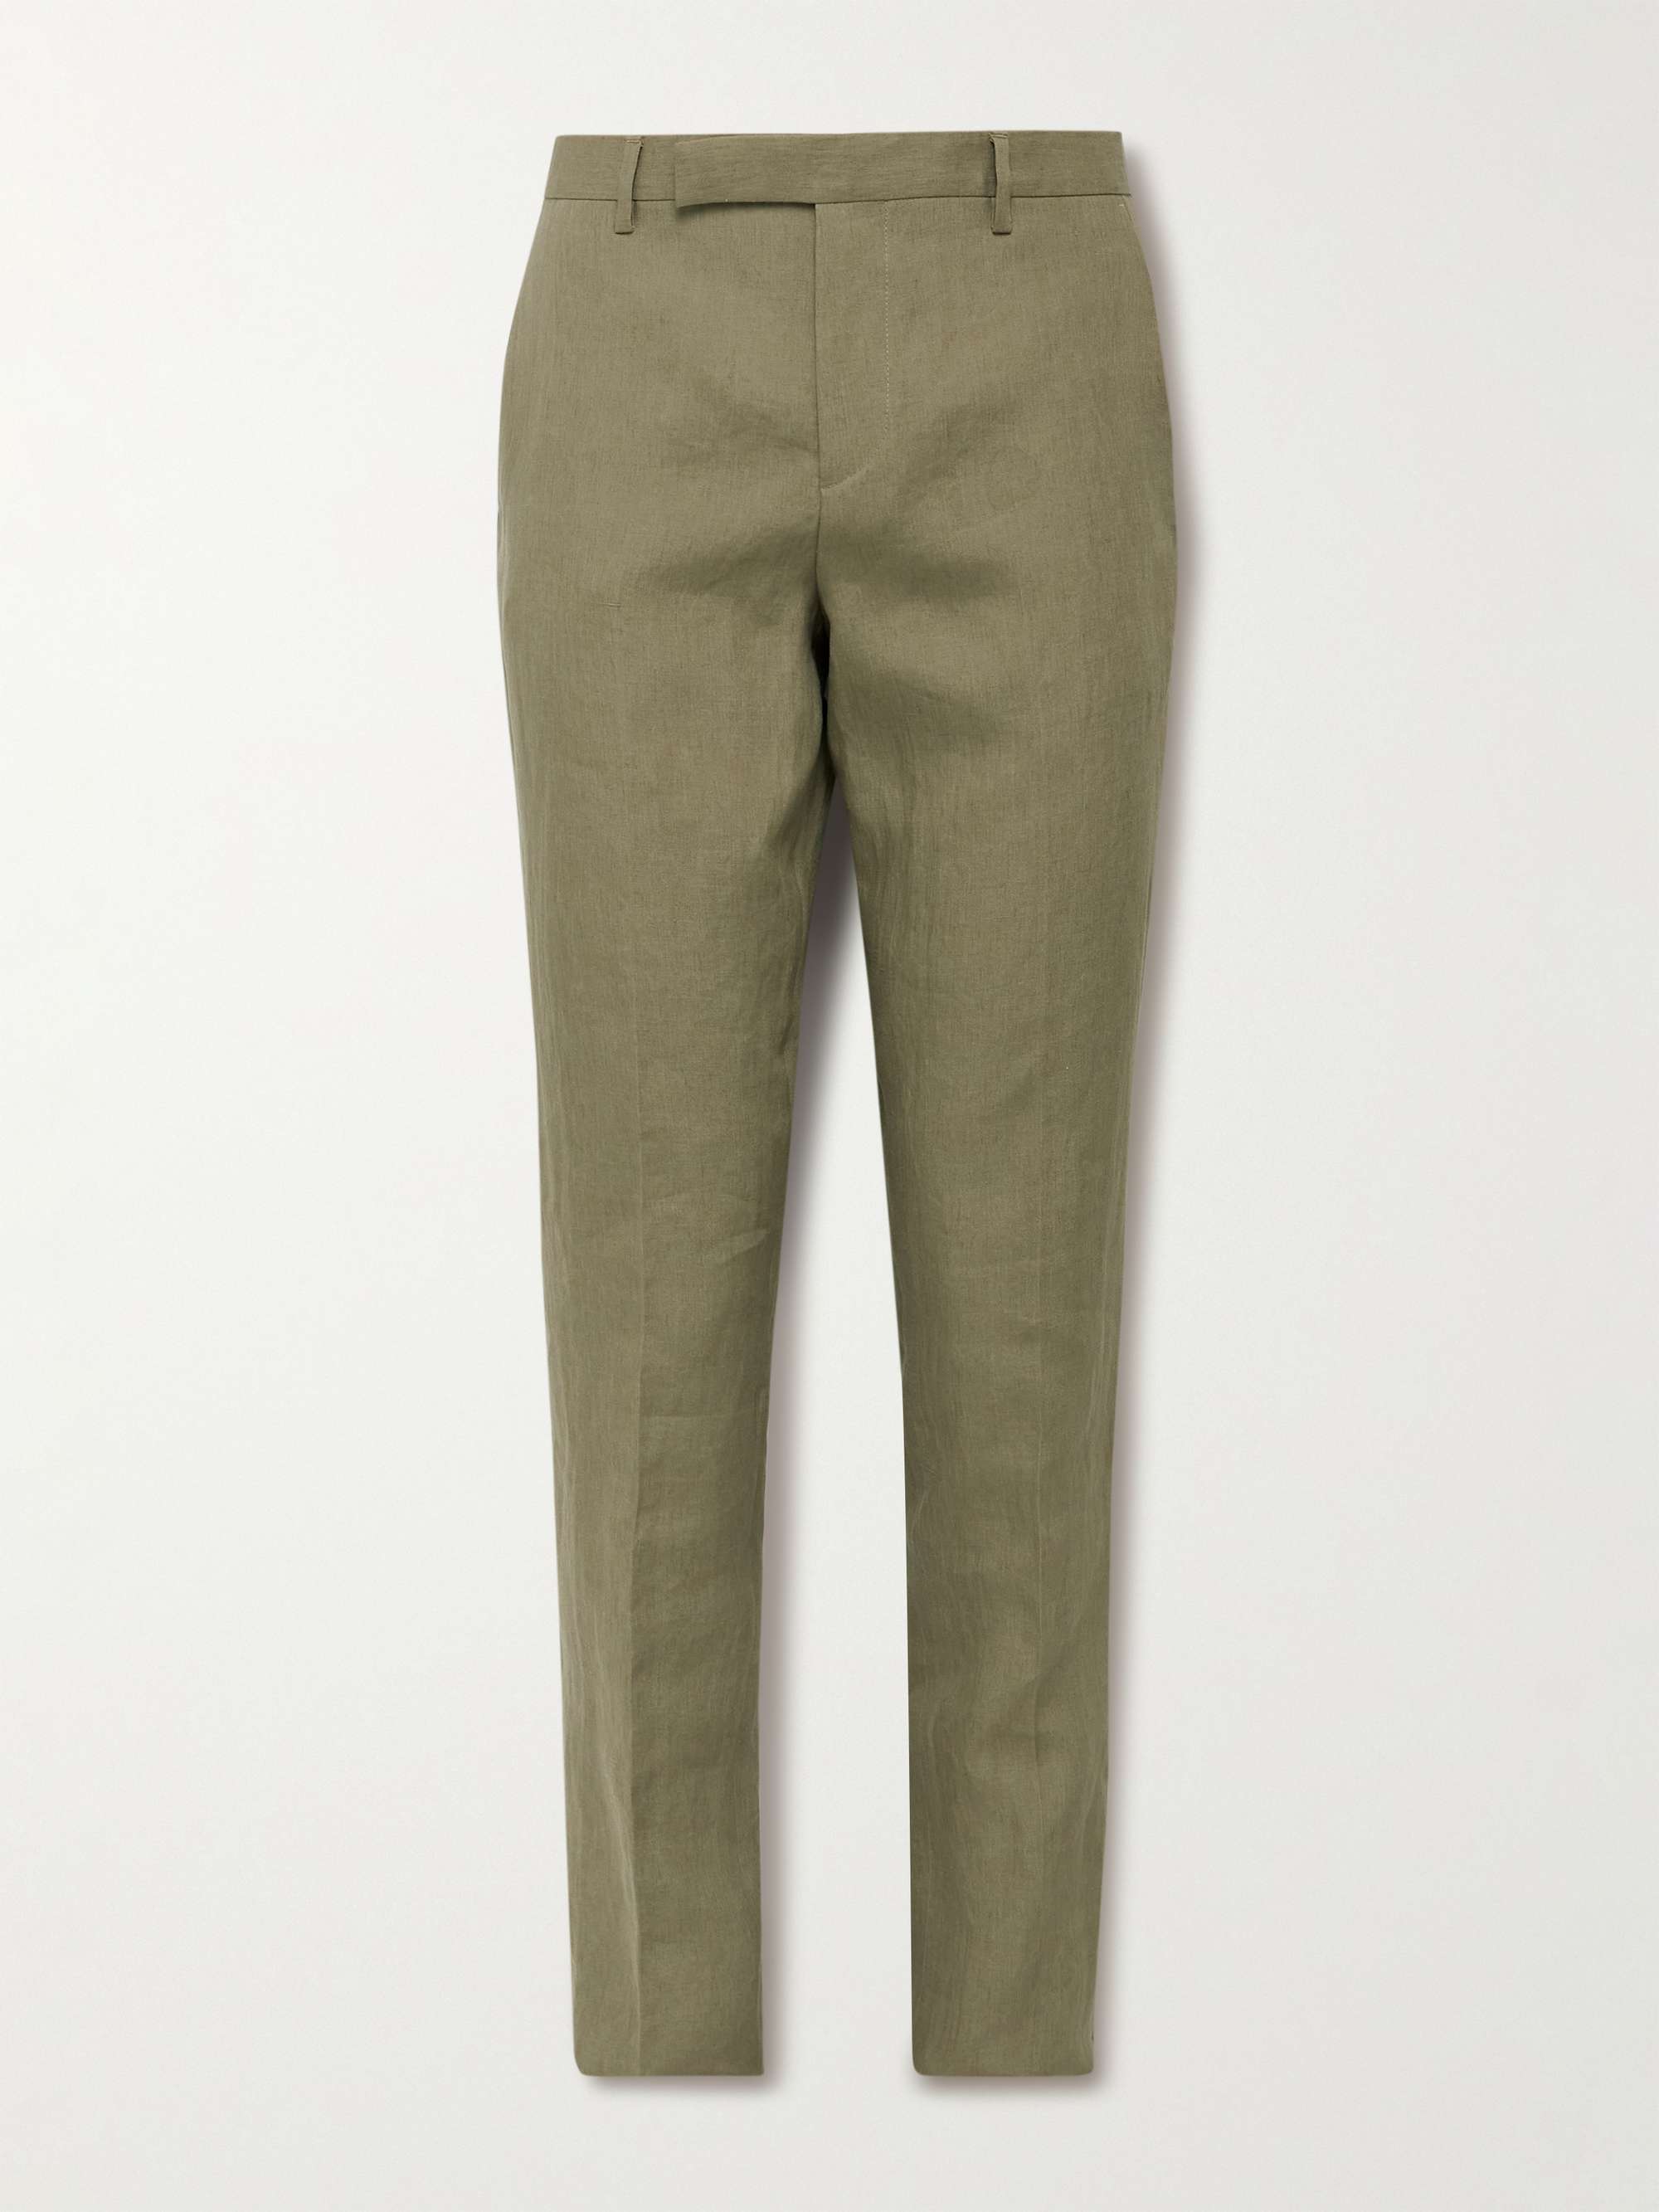 Paul Smith Cream Pleated Trousers - Men from Brother2Brother UK